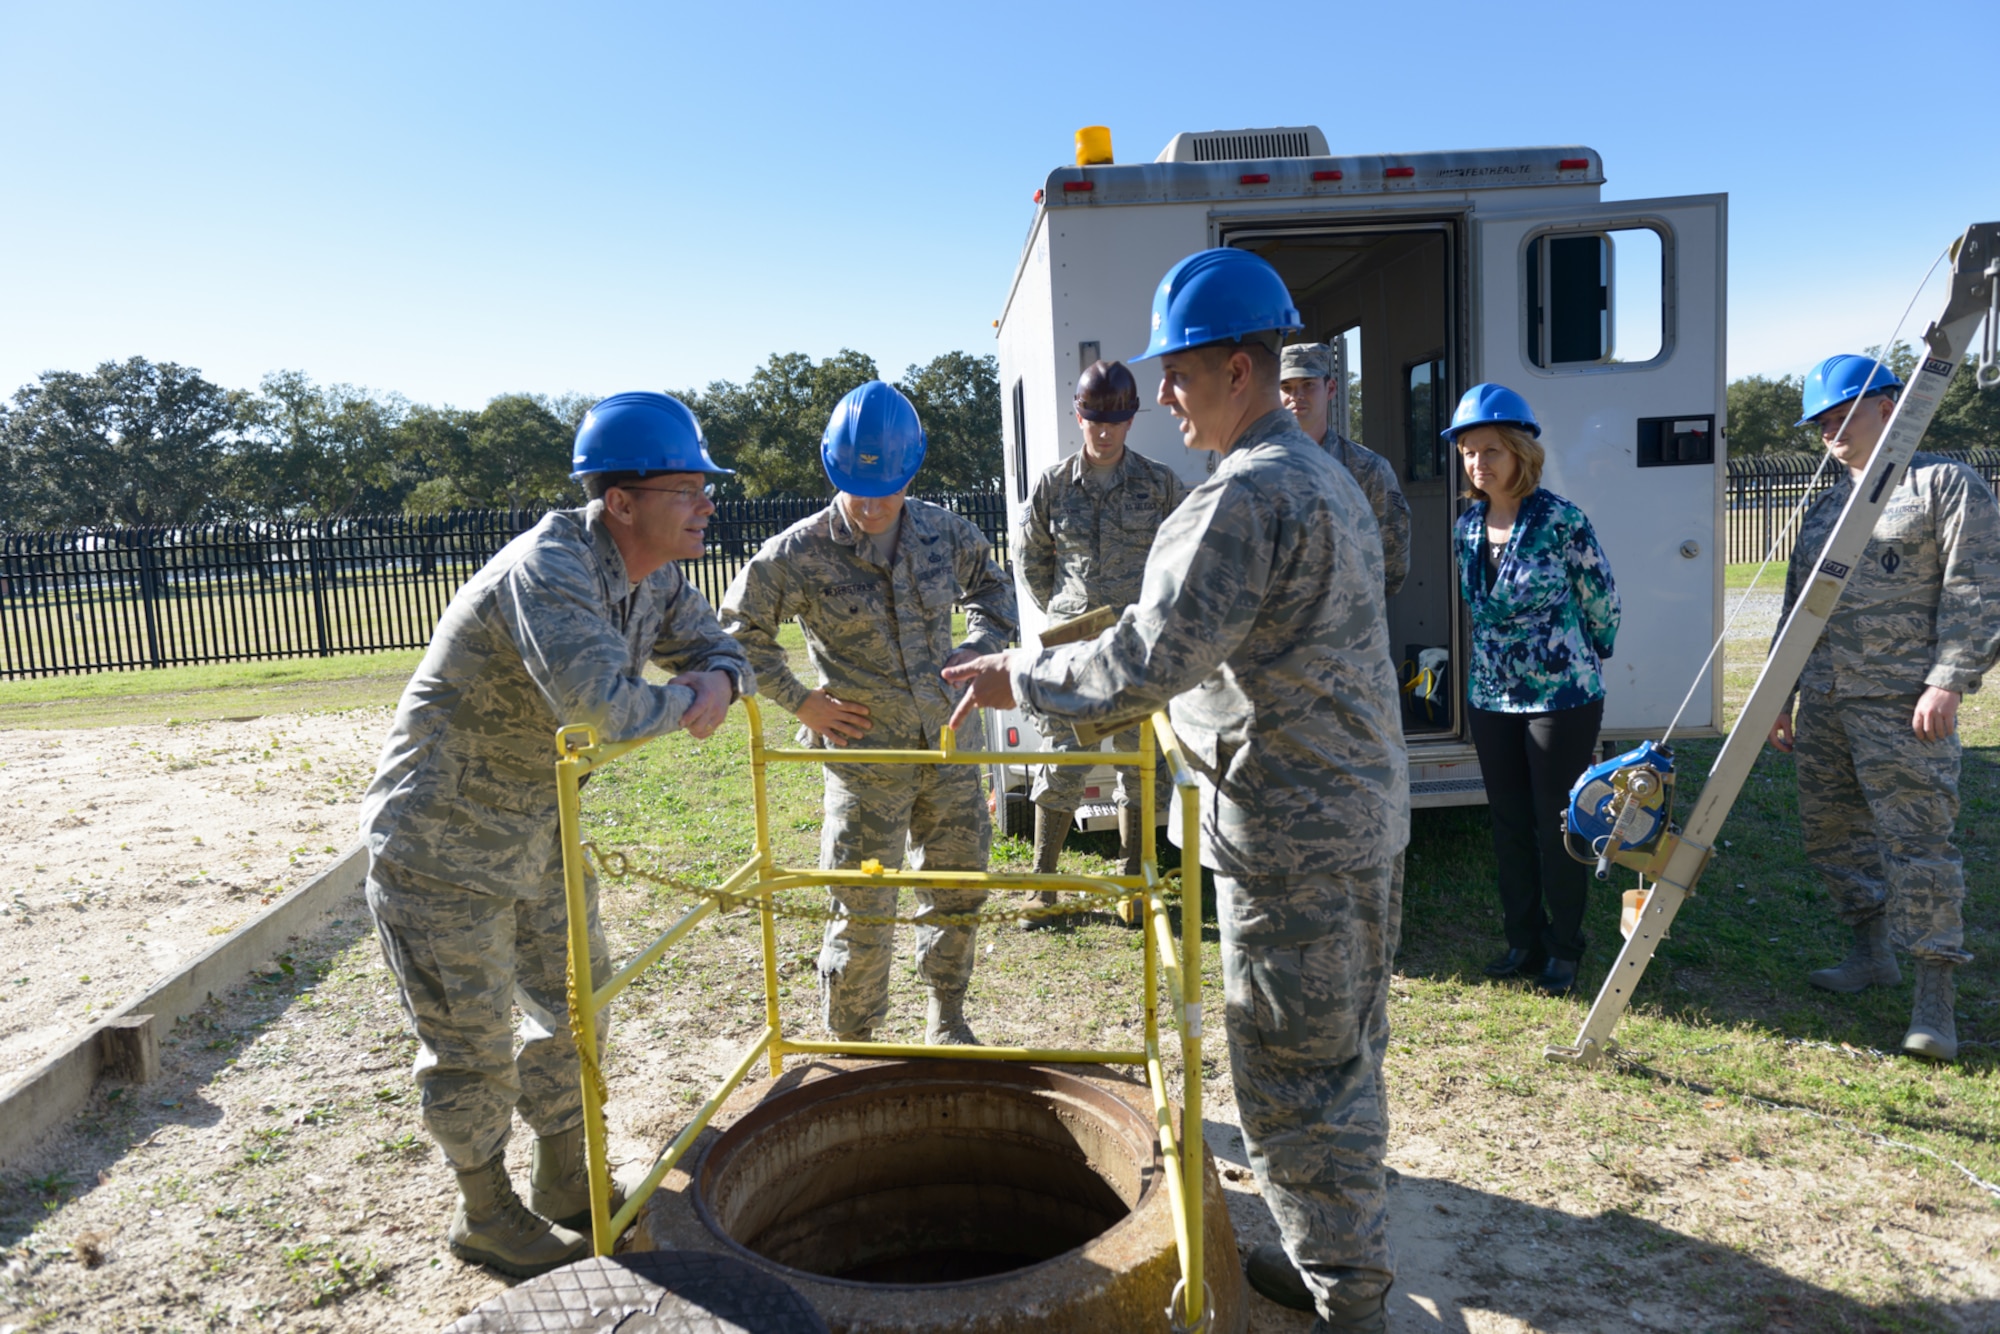 A group of 85th Engineering Installation Squadron Airmen explain manhole entry procedures to Maj. Gen. Robert LaBrutta, 2nd Air Force commander, during a 2nd AF immersion tour of the unit located at Keesler Air Force Base, Miss., Feb. 9, 2017. The Airmen at the 85th EIS are part of the only active duty EIS in the Air Force. During contingencies, the 85th EIS Airmen can deliver their unique skills to the warfighter within 72 hours - anywhere in the world, which is why their motto is, "With Pride, Worldwide!" (U.S. Air Force photo by Andre’ Askew)